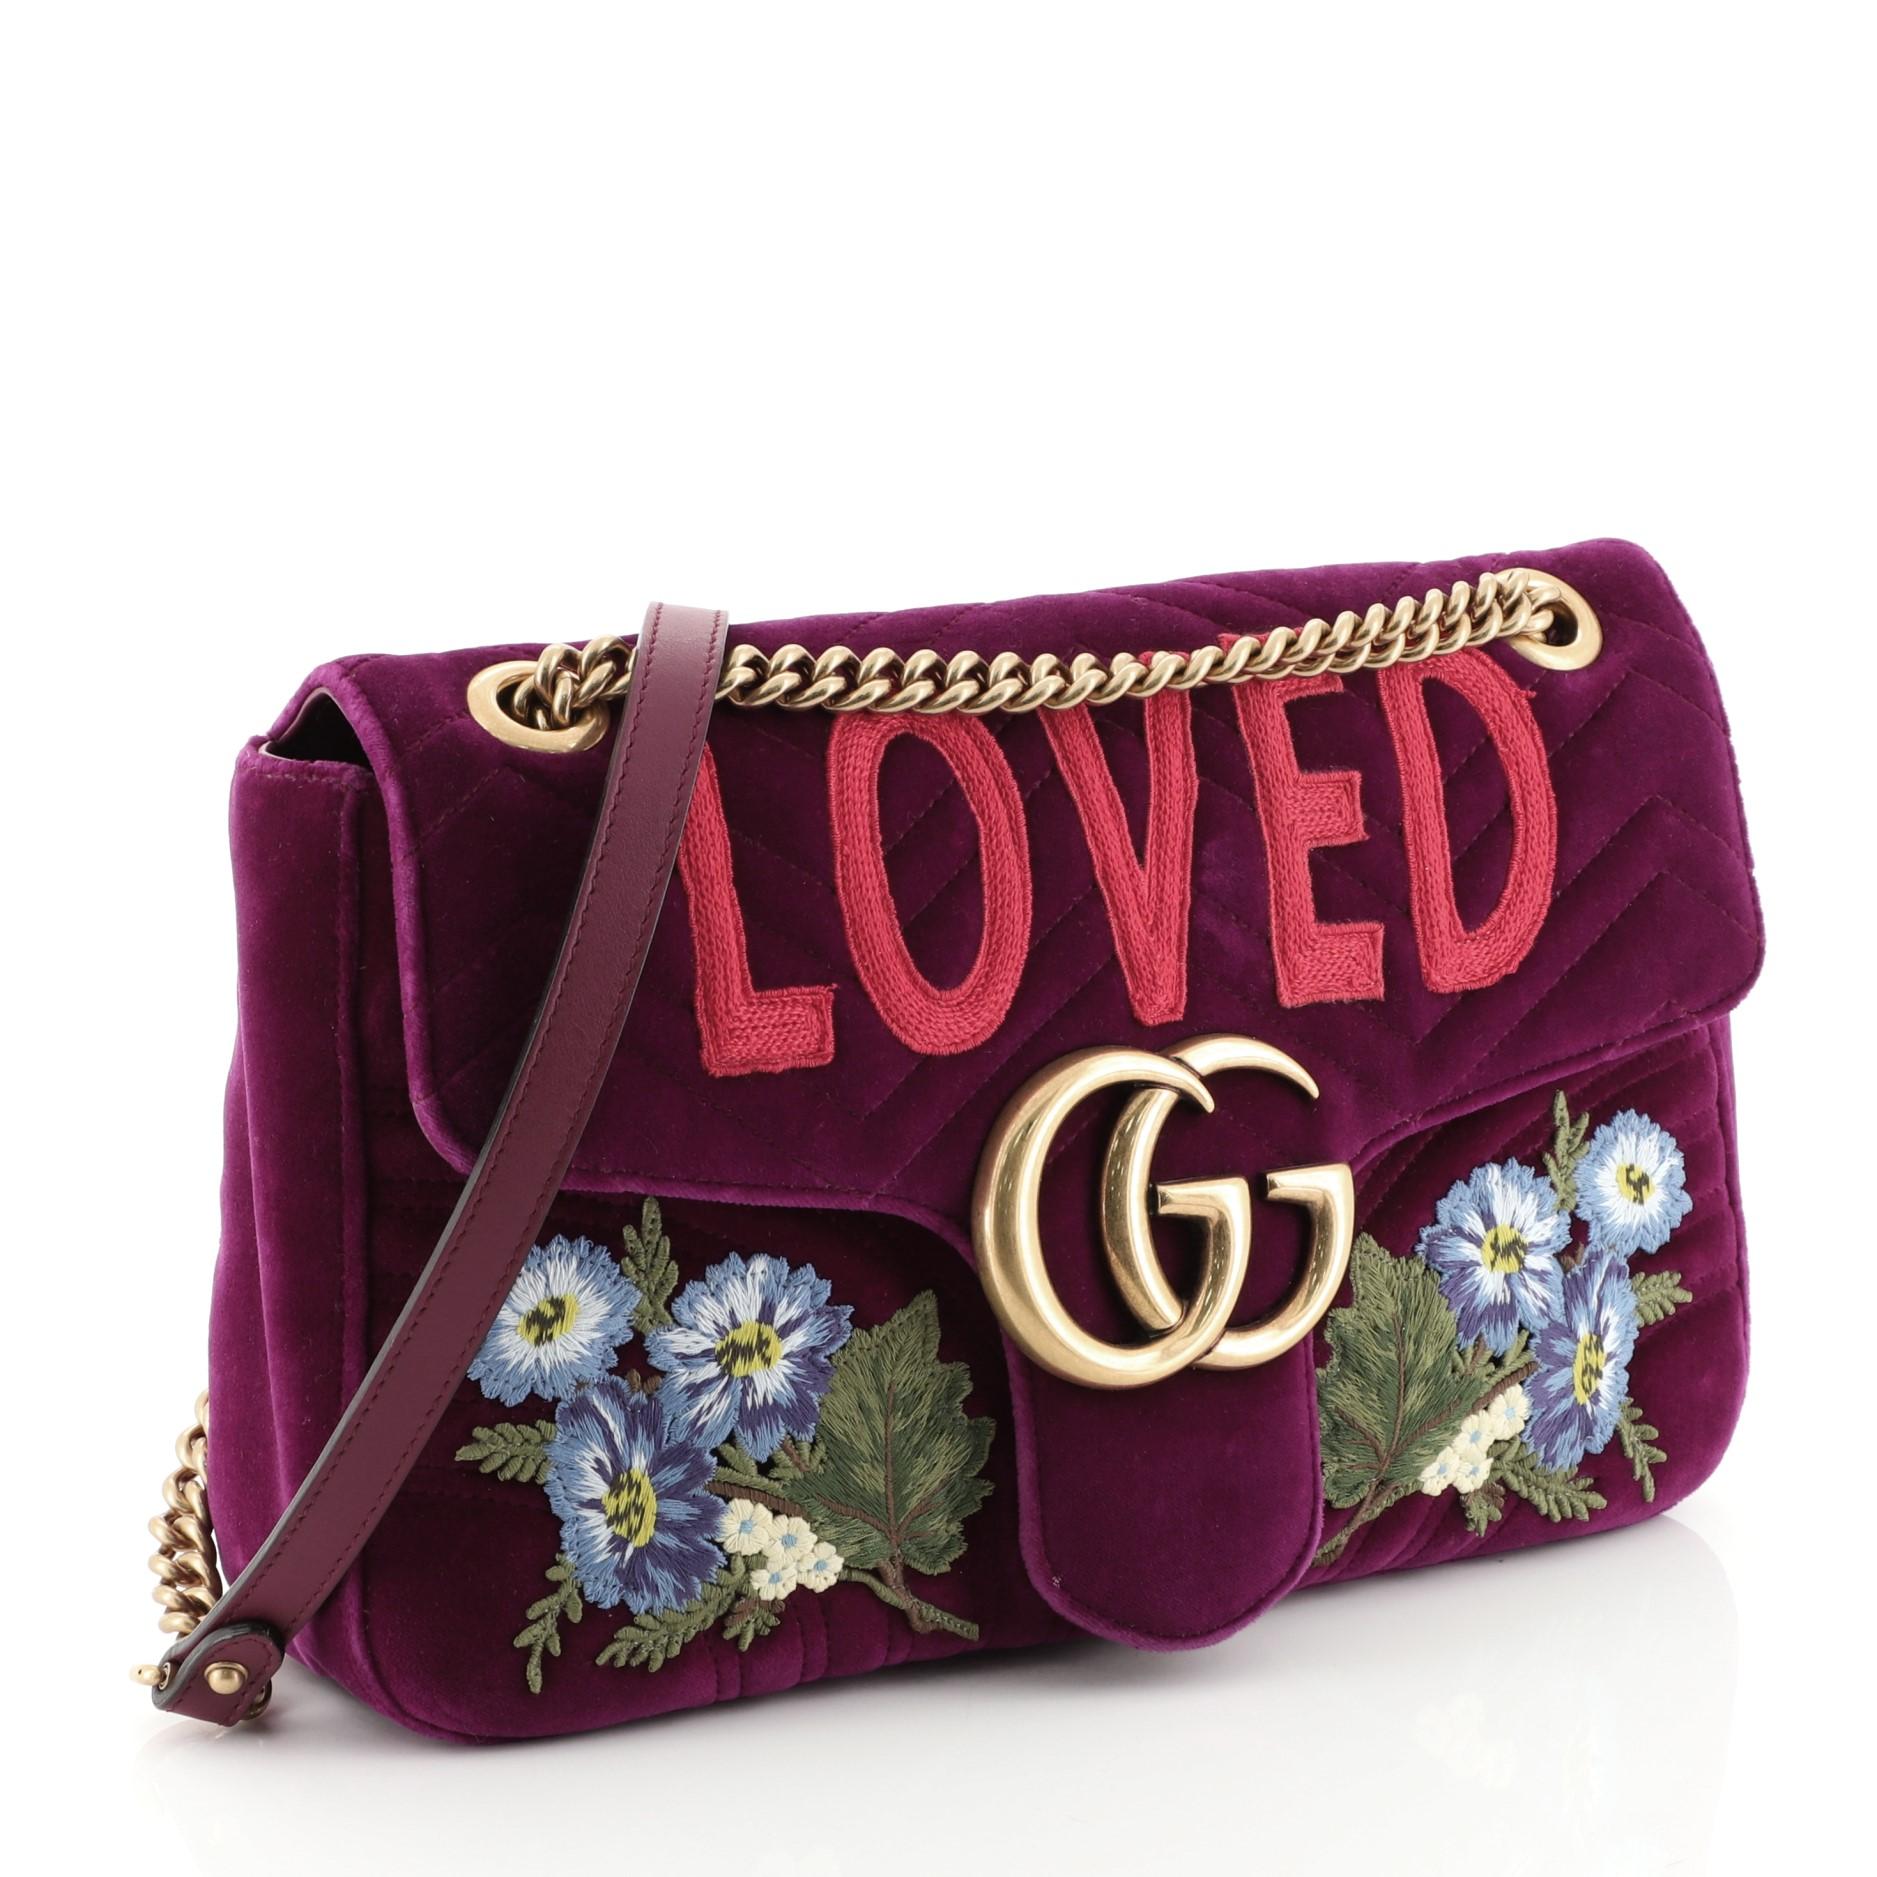 This Gucci GG Marmont Flap Bag Embroidered Matelasse Velvet Medium, crafted in purple embroidered matelasse velvet, features chain link shoulder strap with leather pad, embroidered flowers, GG logo at front flap and aged gold-tone hardware. Its